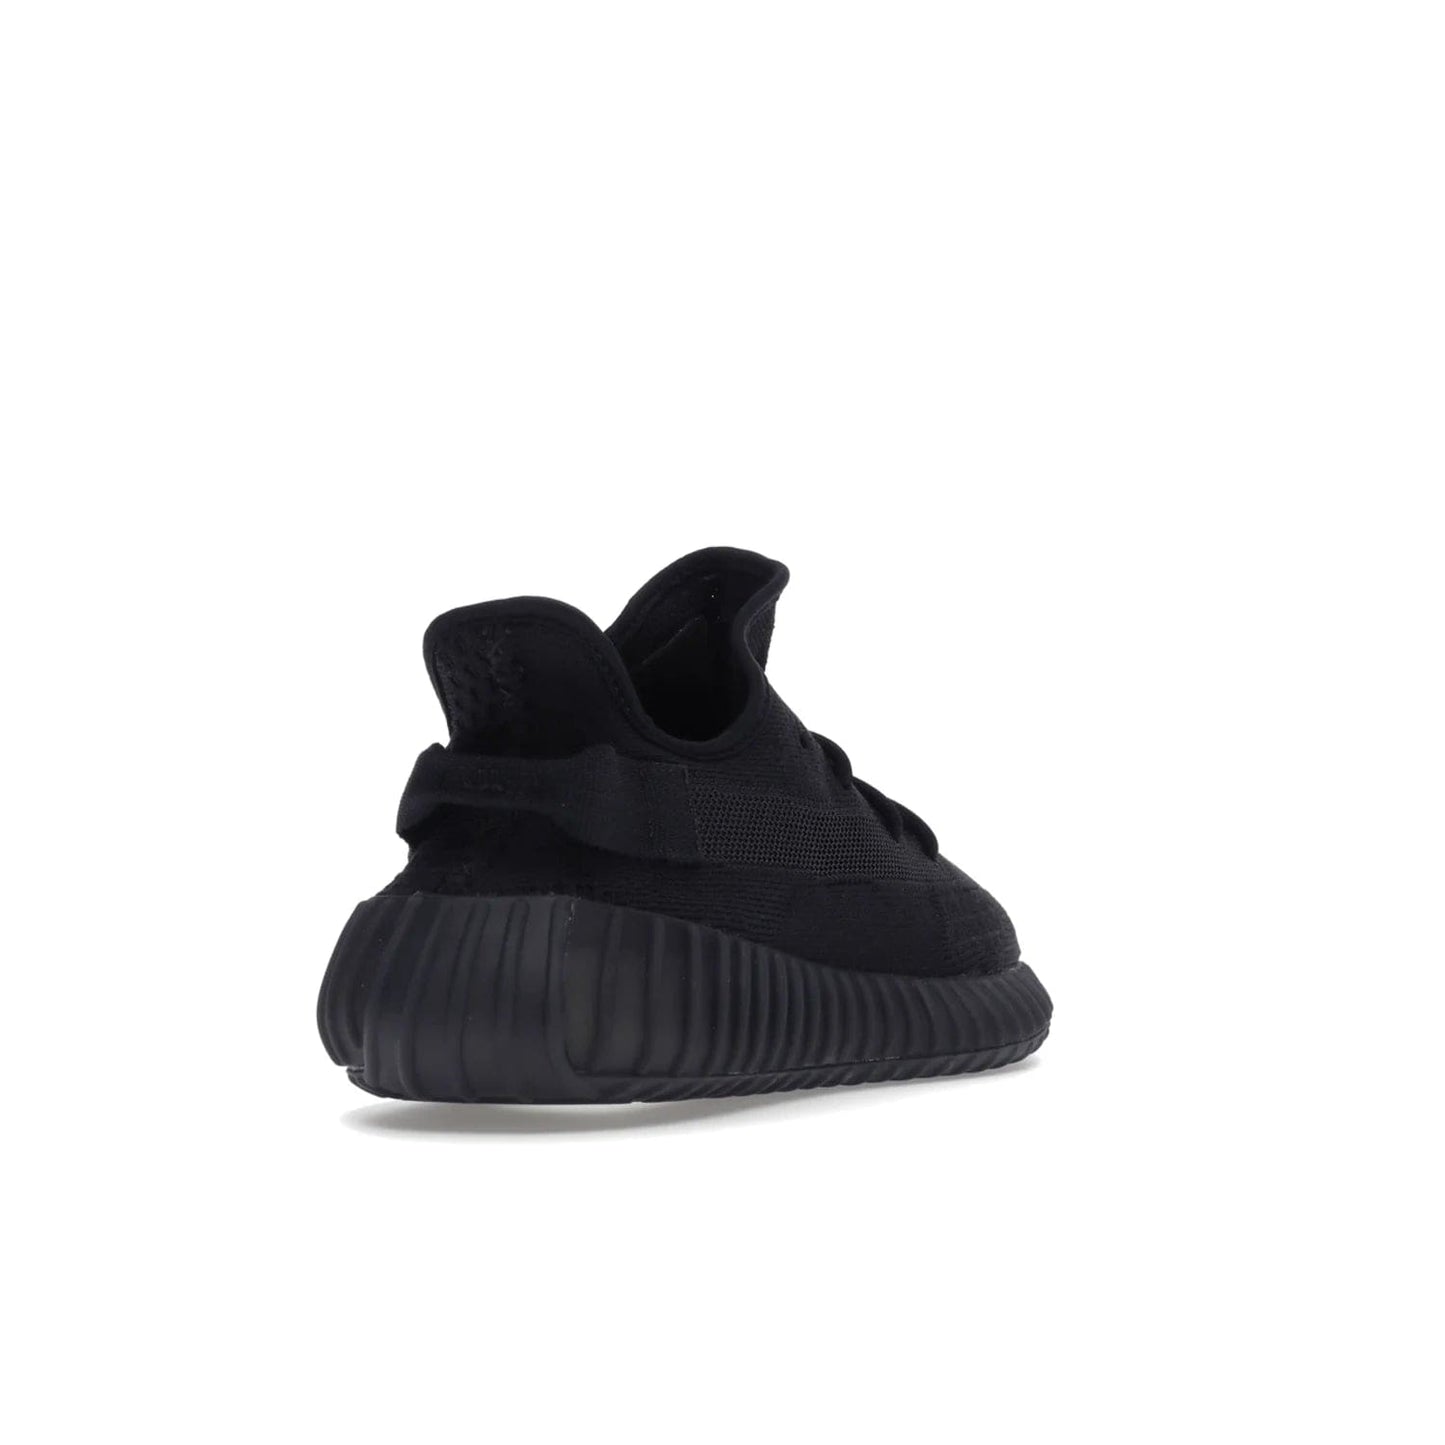 adidas Yeezy Boost 350 V2 Onyx - Image 31 - Only at www.BallersClubKickz.com - Adidas Yeezy Boost 350 V2 Onyx Triple Black shoes for comfort and style. Arriving Spring 2022.